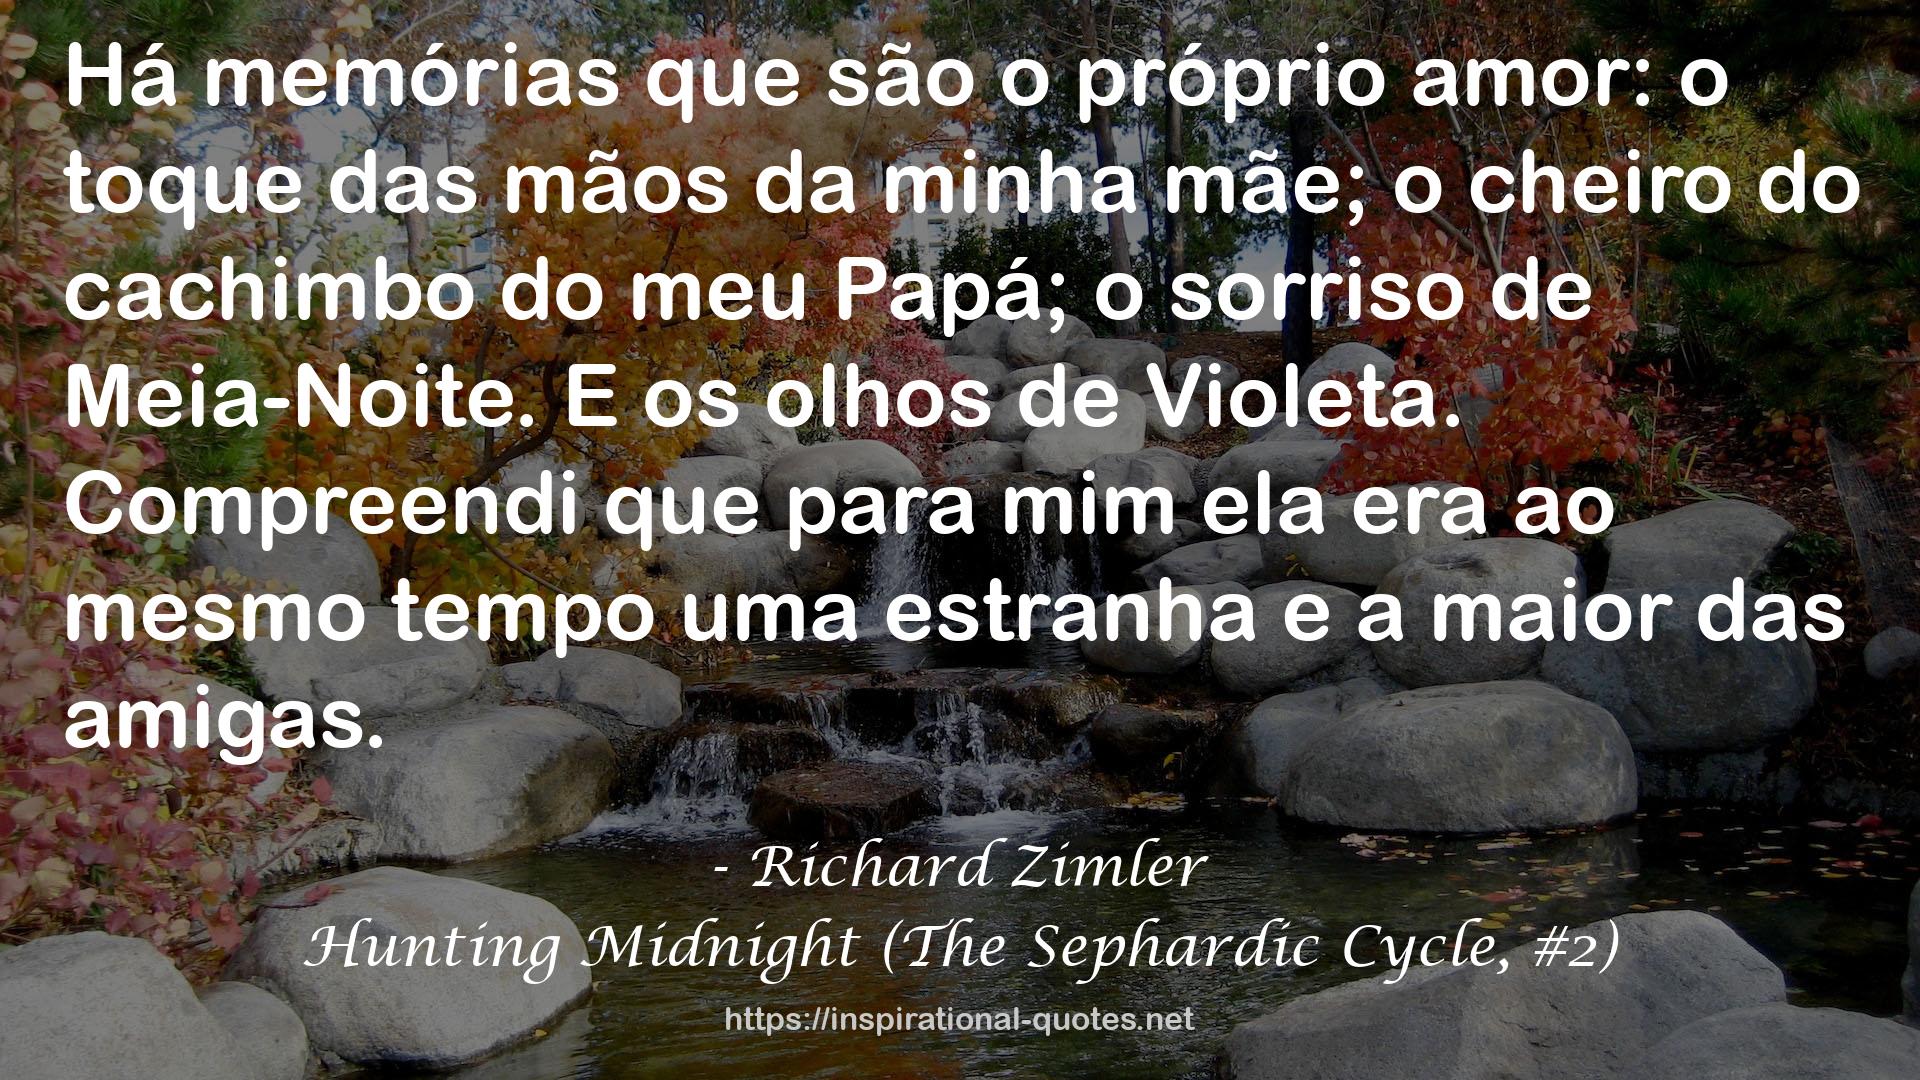 Hunting Midnight (The Sephardic Cycle, #2) QUOTES